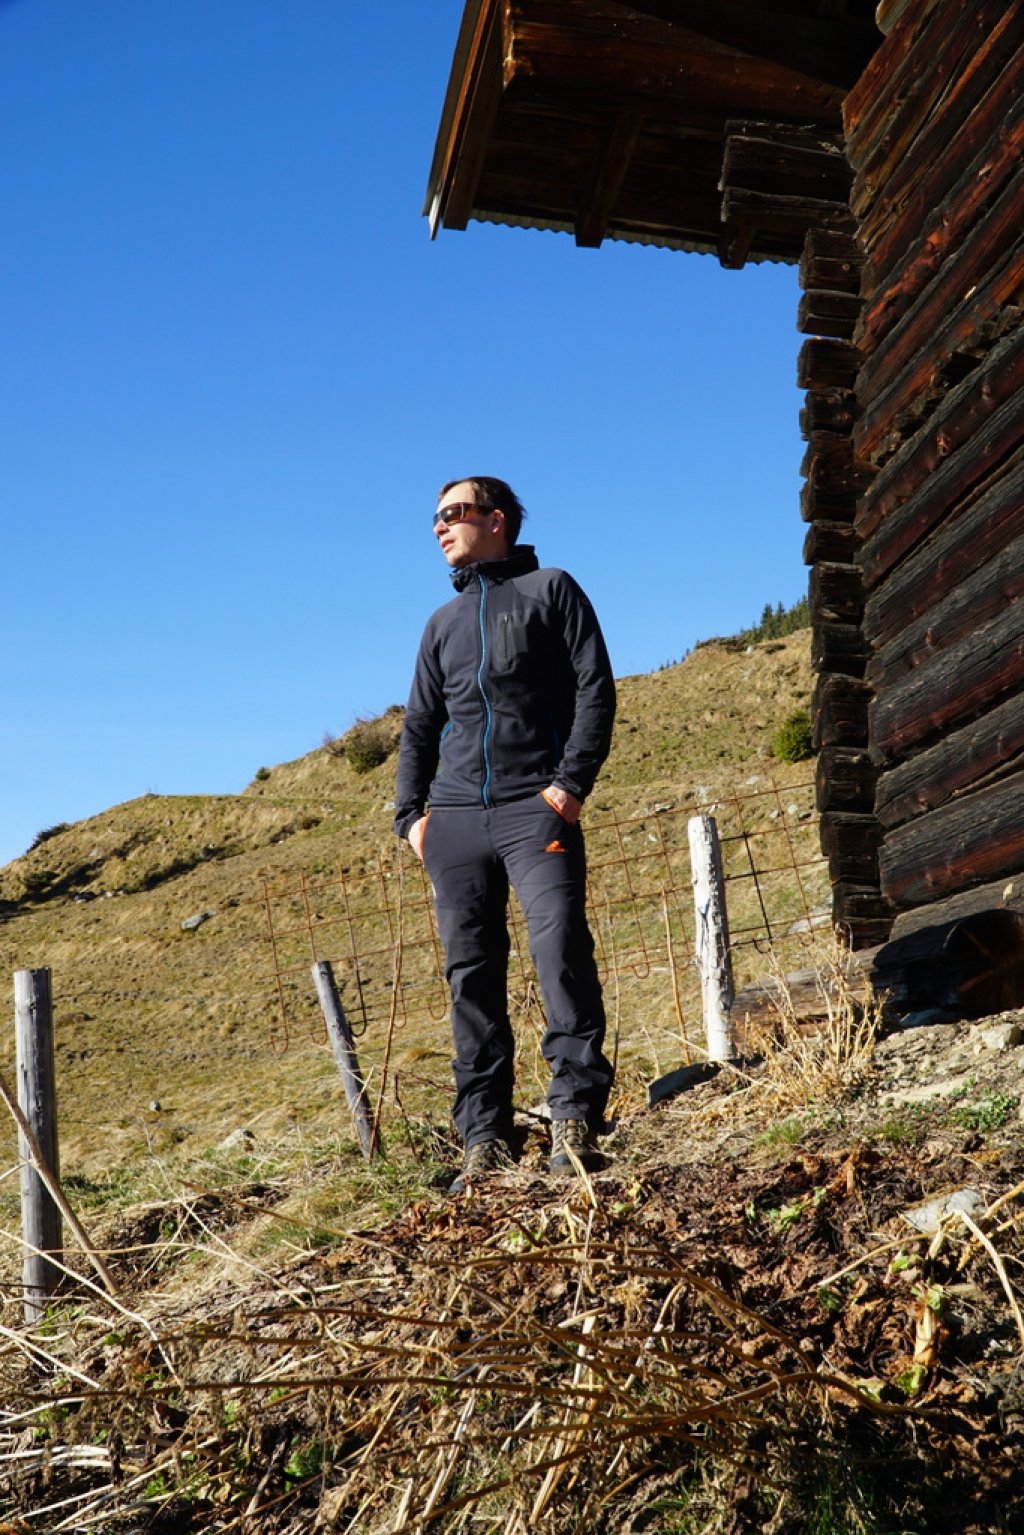 If there's no snow for Christmas, the Atom Hoody is also great for hiking...